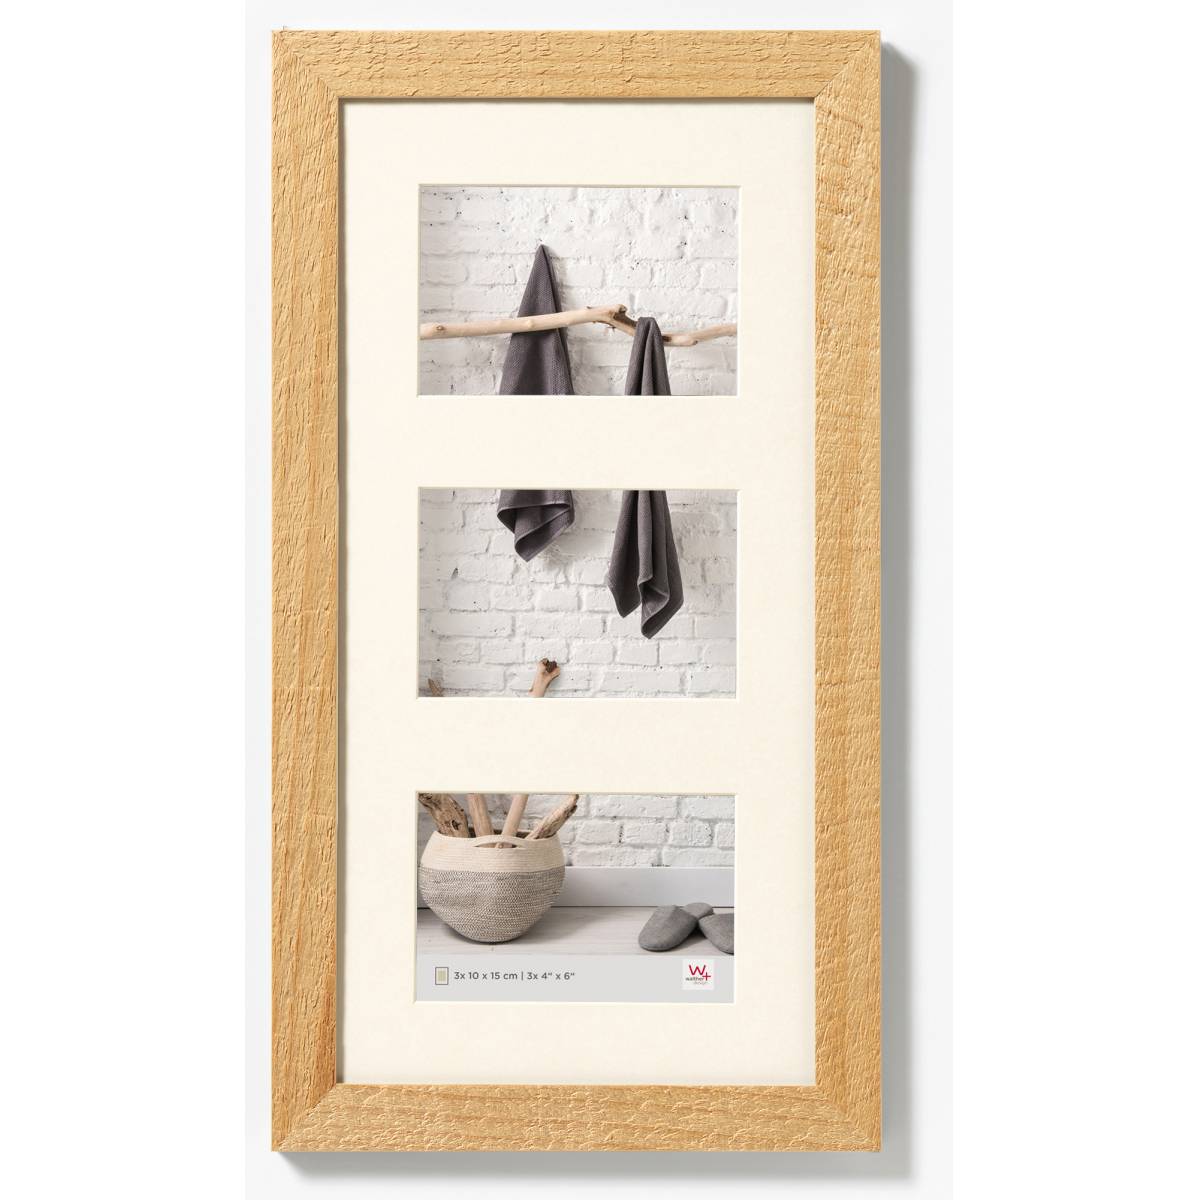 Walther Home Wooden Multi Picture Frame for 3x 6x4 inch - Nature